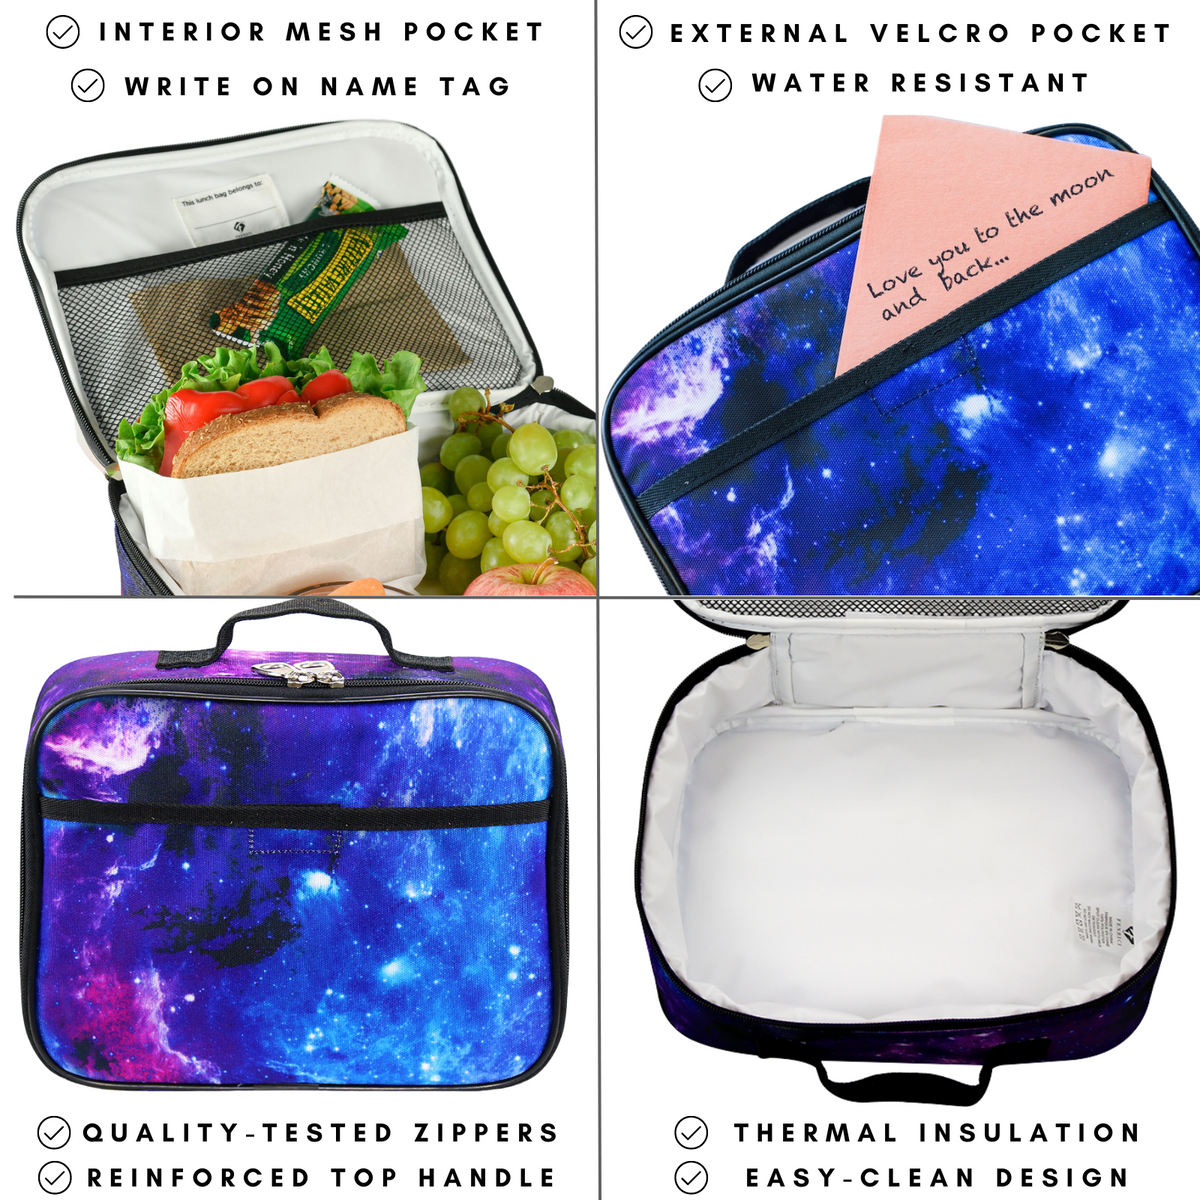 Fenrici Galaxy Lunch Box for Boys, Kids, Boy's Lunch Box for School,  Insulated Lunch Bag for Prescho…See more Fenrici Galaxy Lunch Box for Boys,  Kids